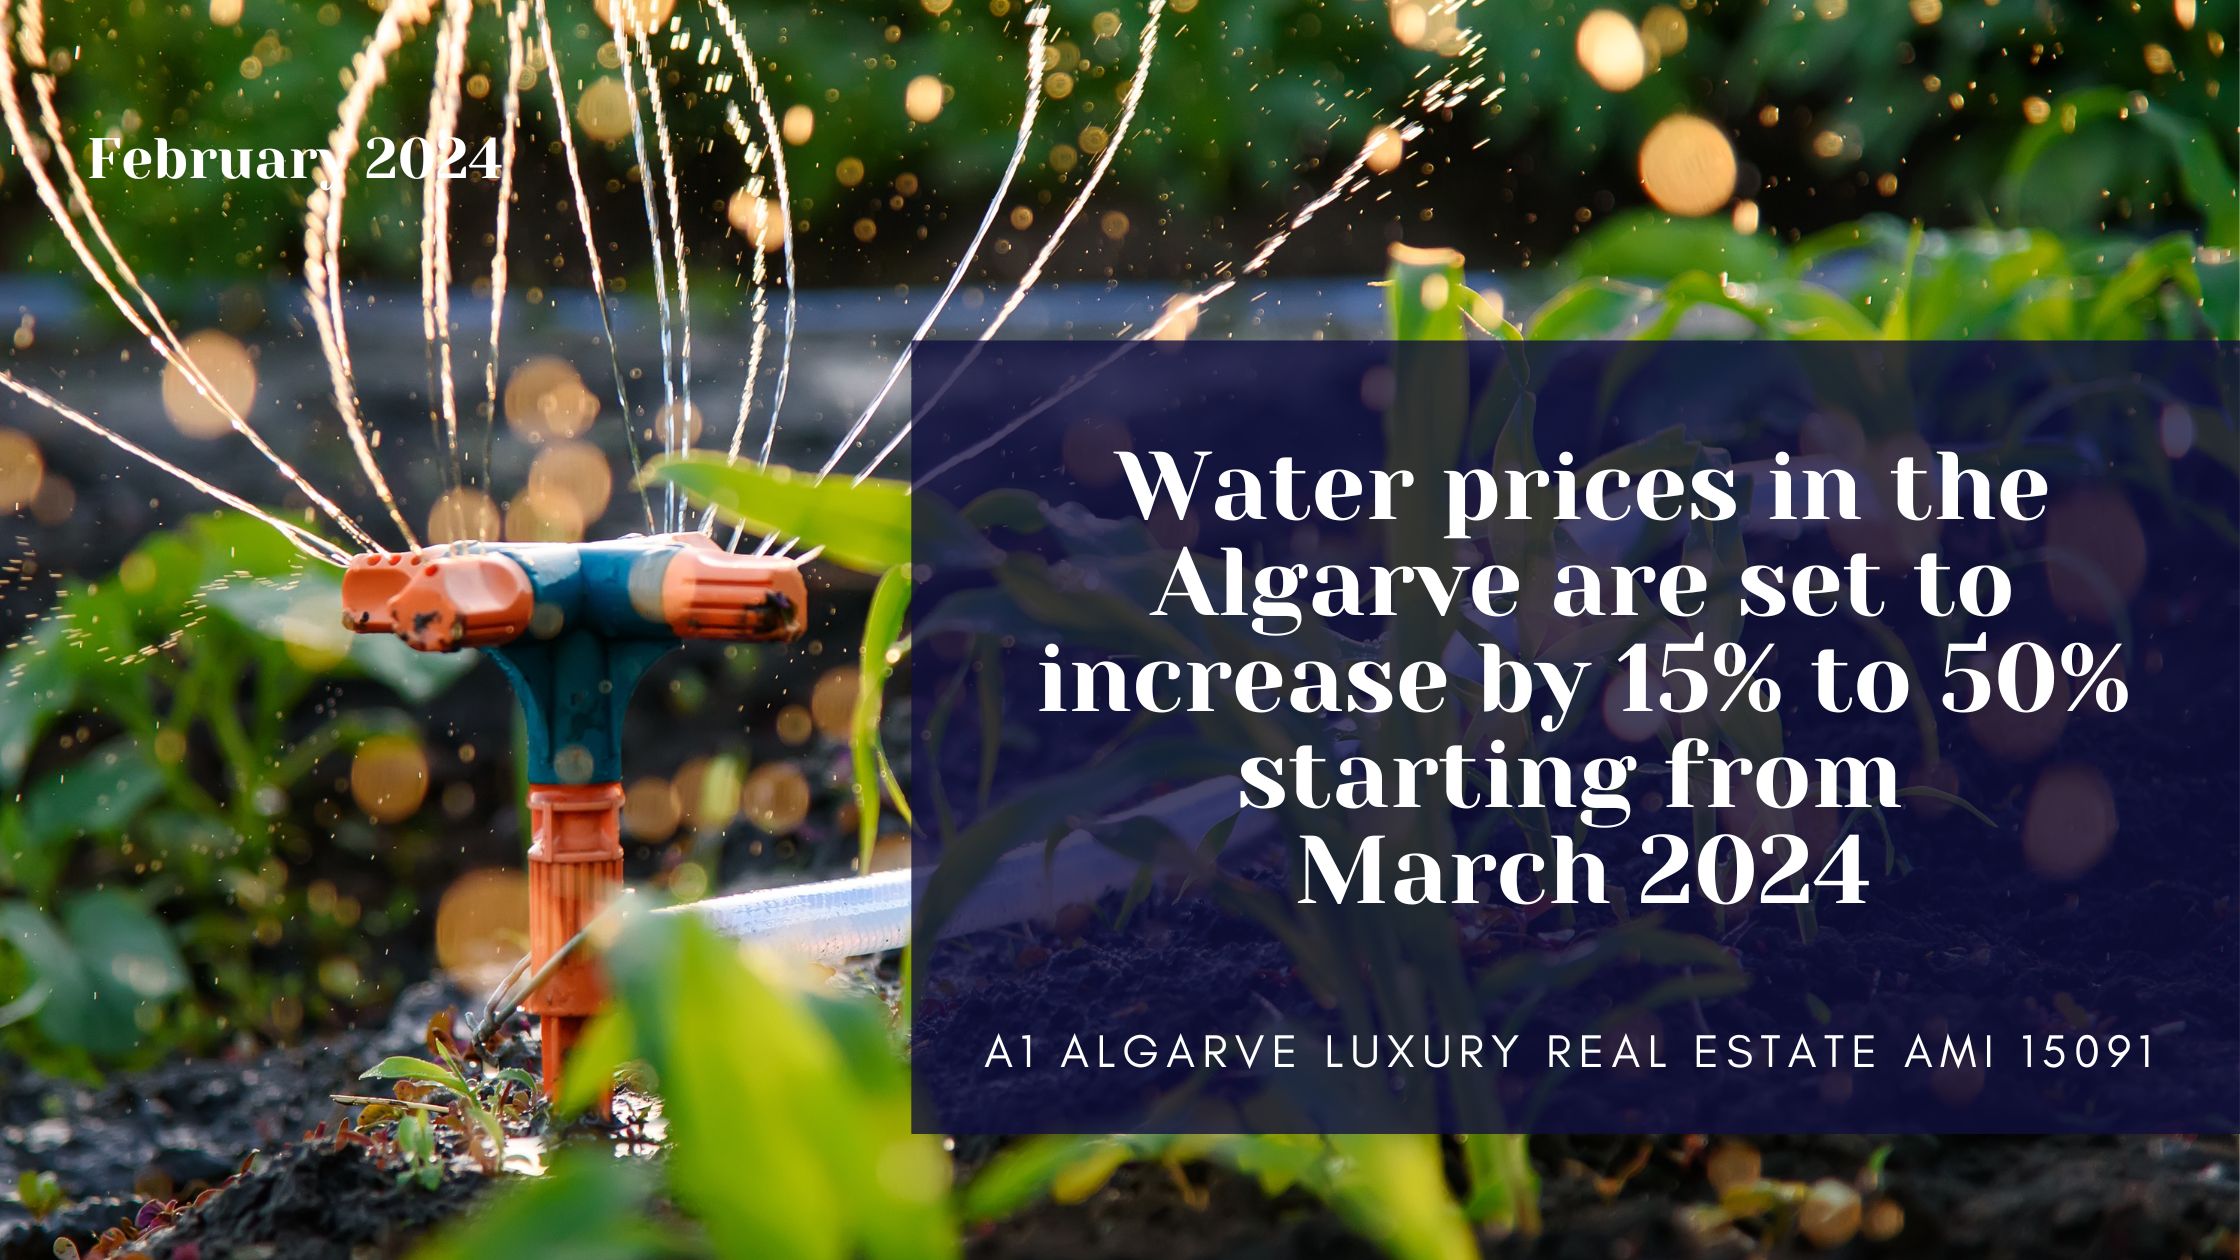 Water prices in the Algarve are set to increase by 15% to 50% starting from March 2024